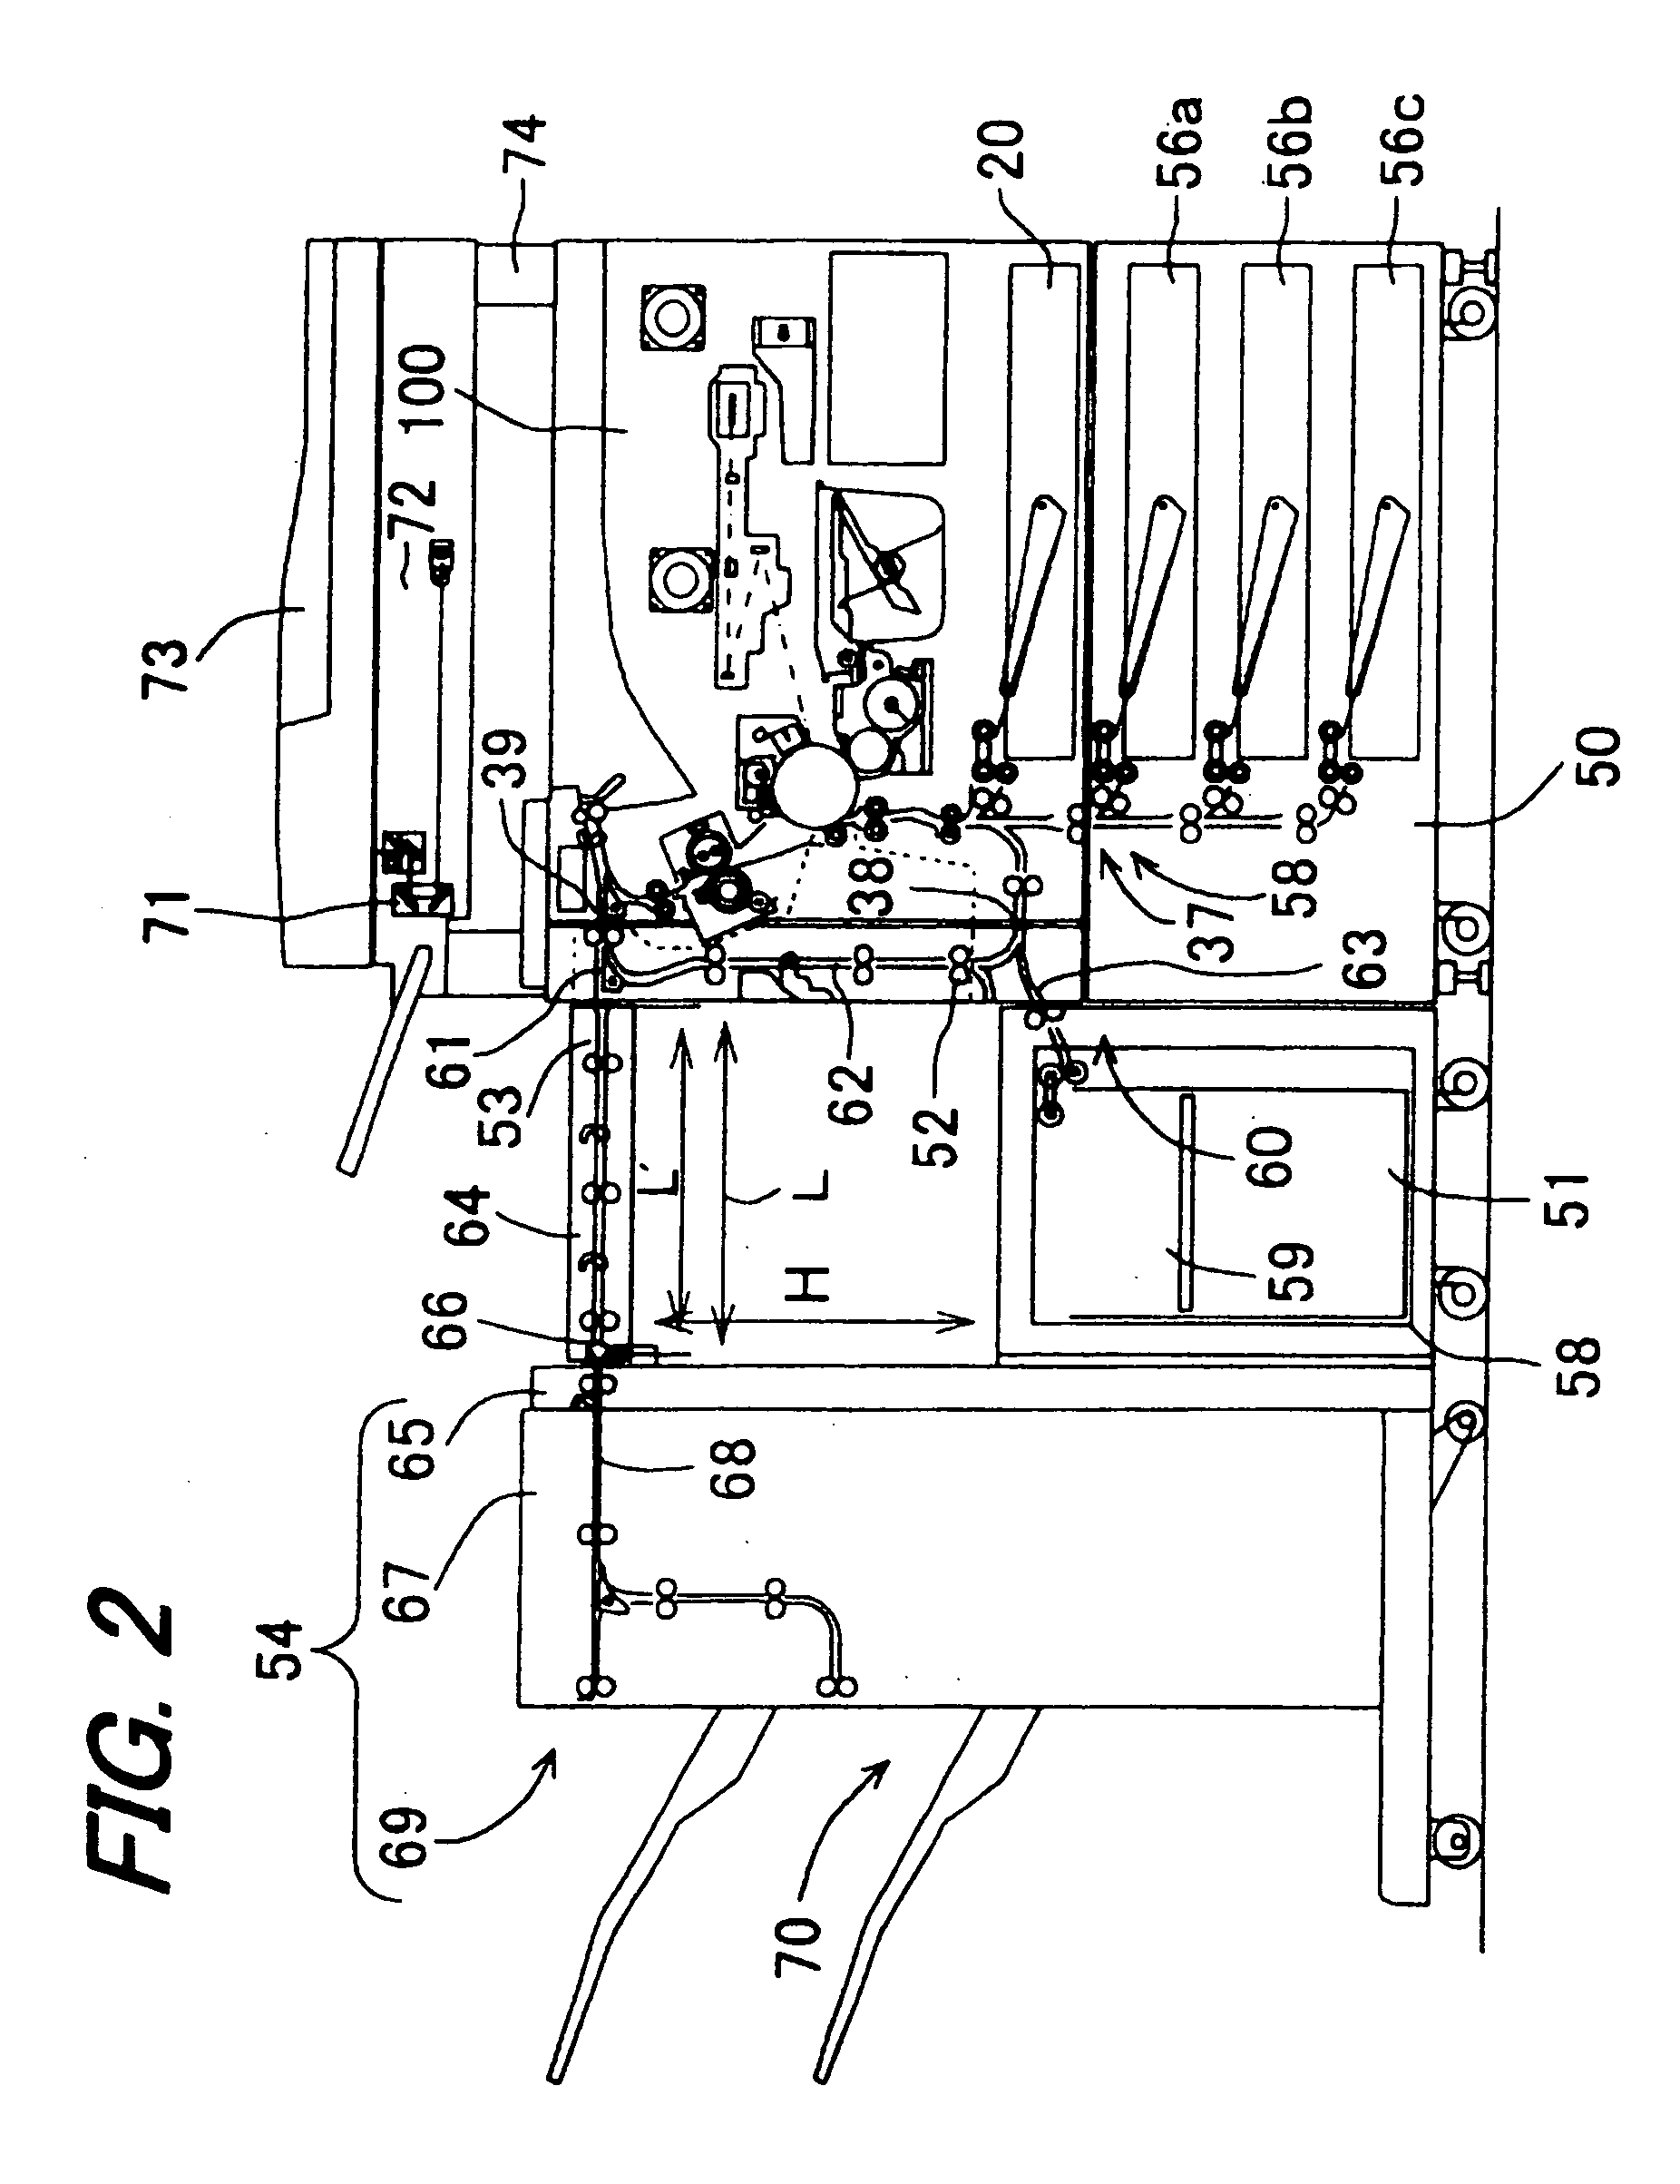 Developing toner for electrostatic latent images, imaging forming method and image forming apparatus